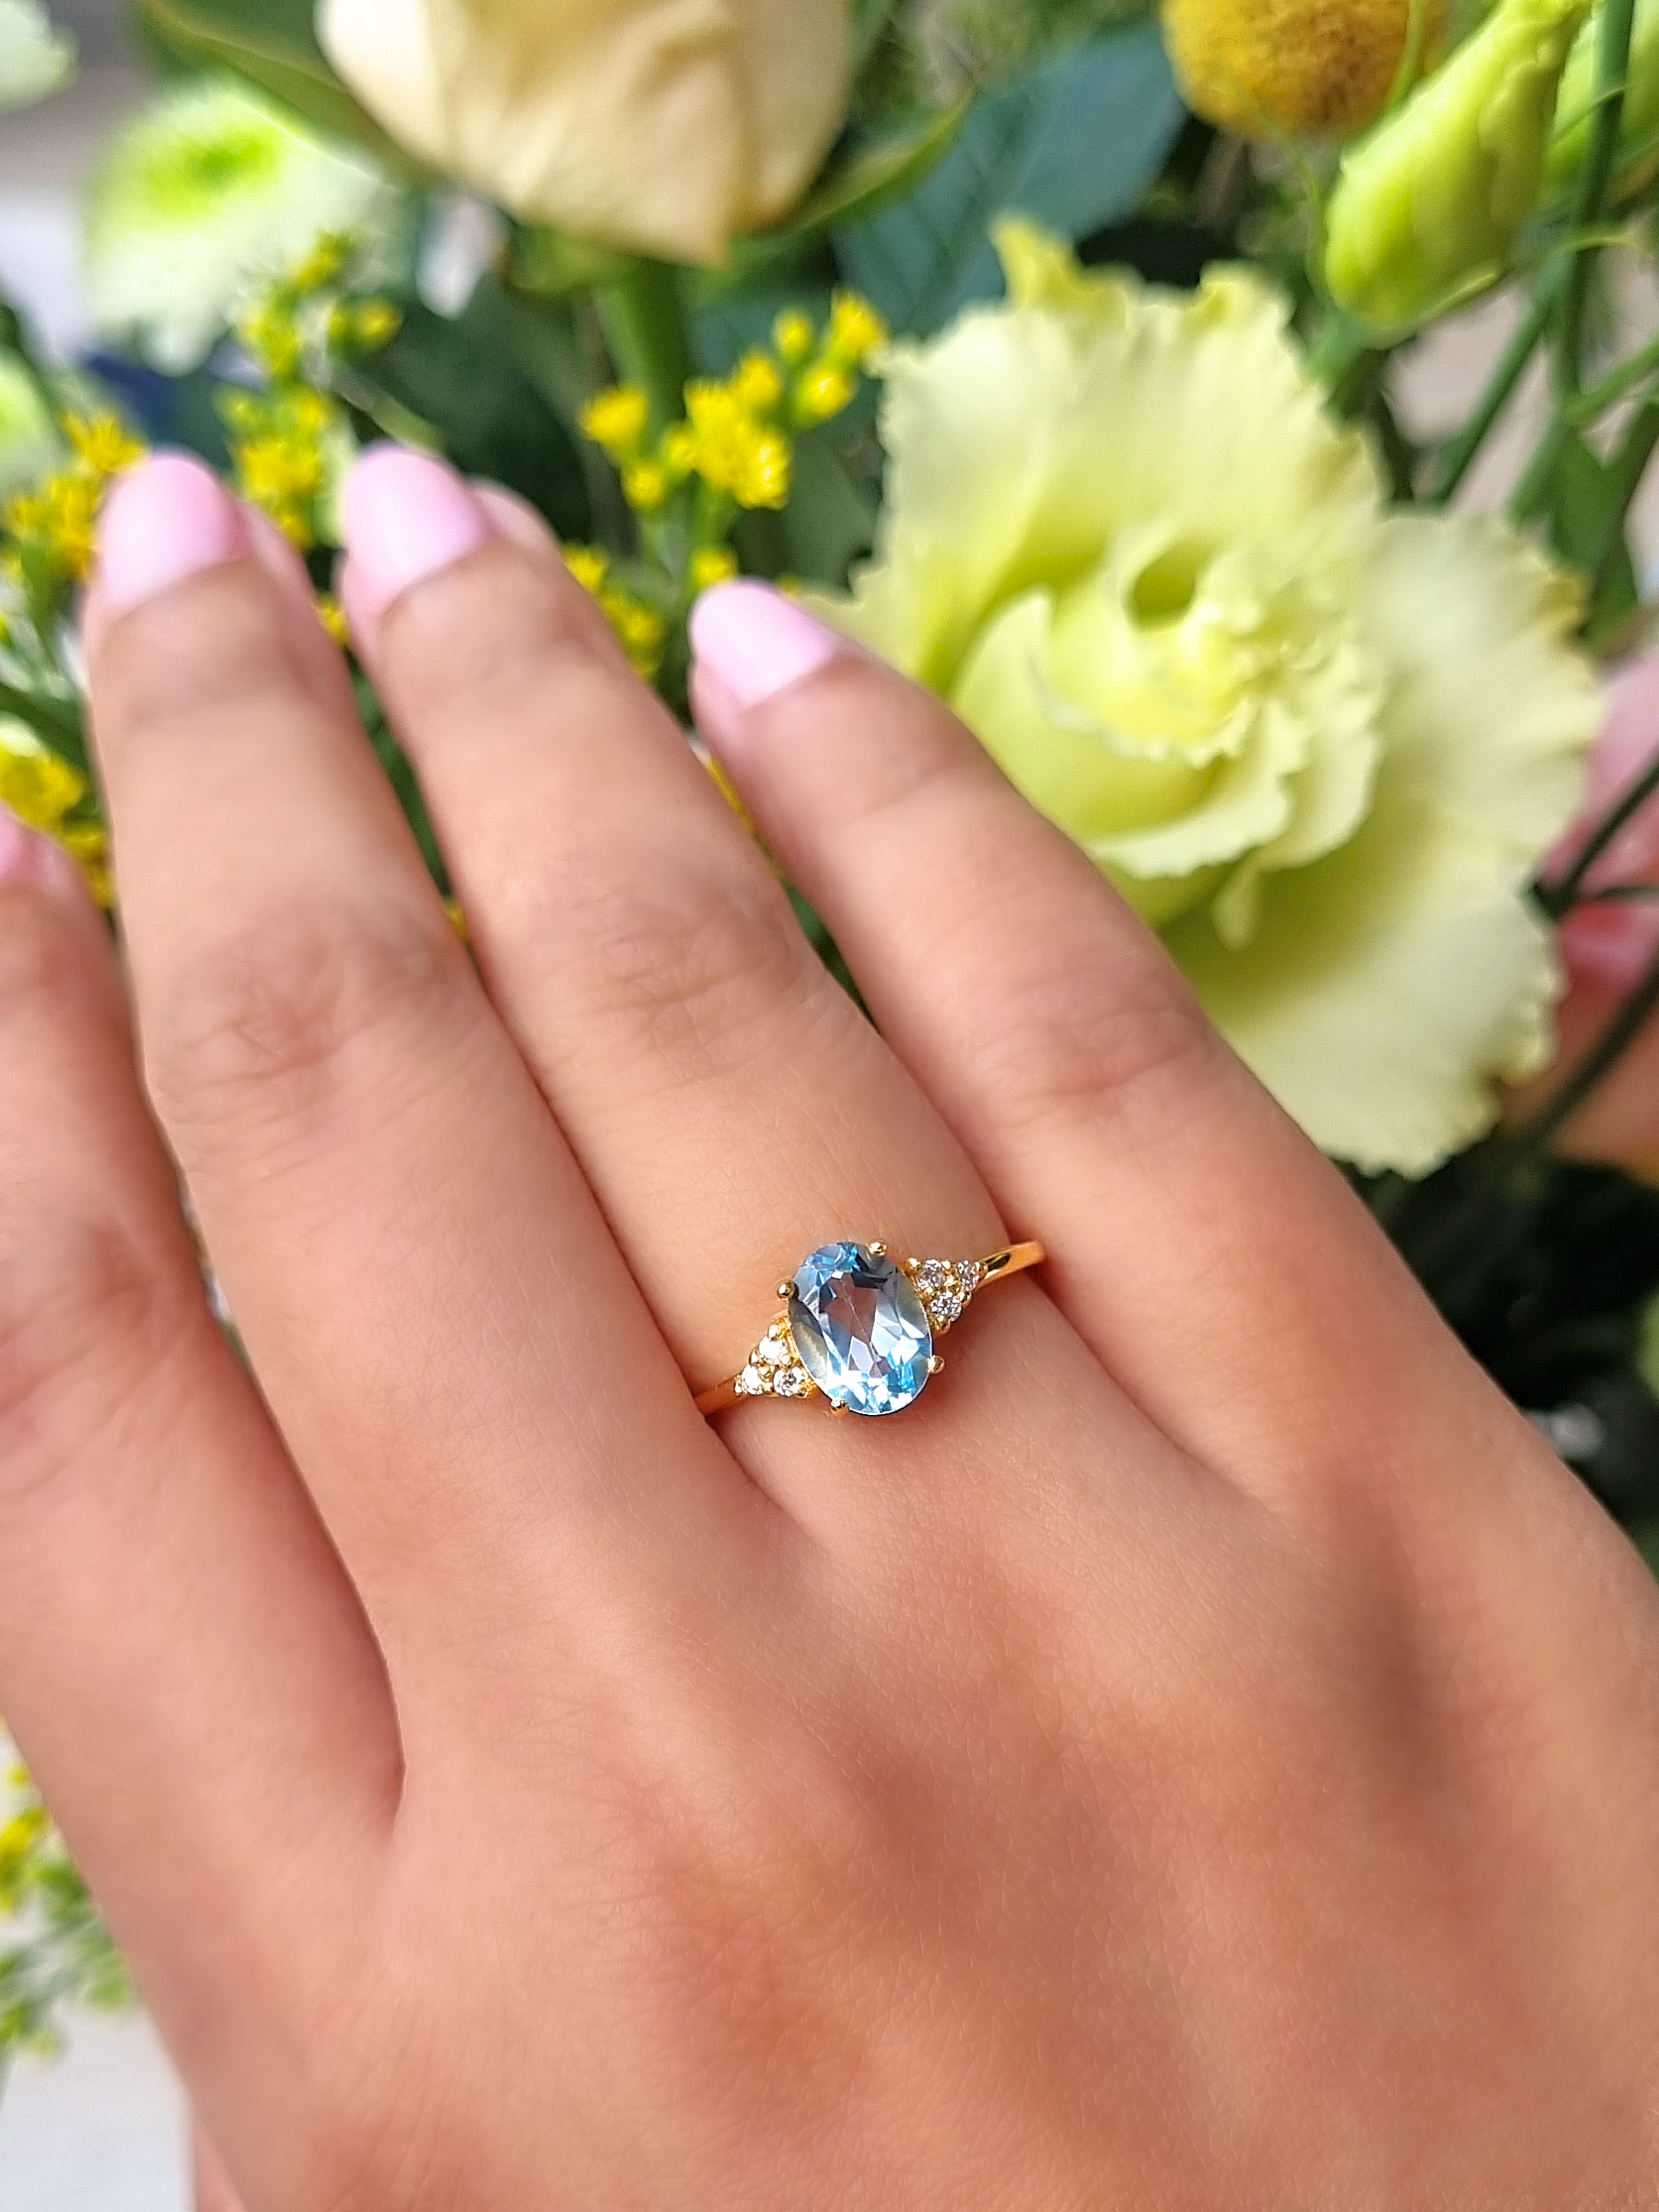 oval cut sky blue topaz engagement and wedding ring in 18k gold vermeil